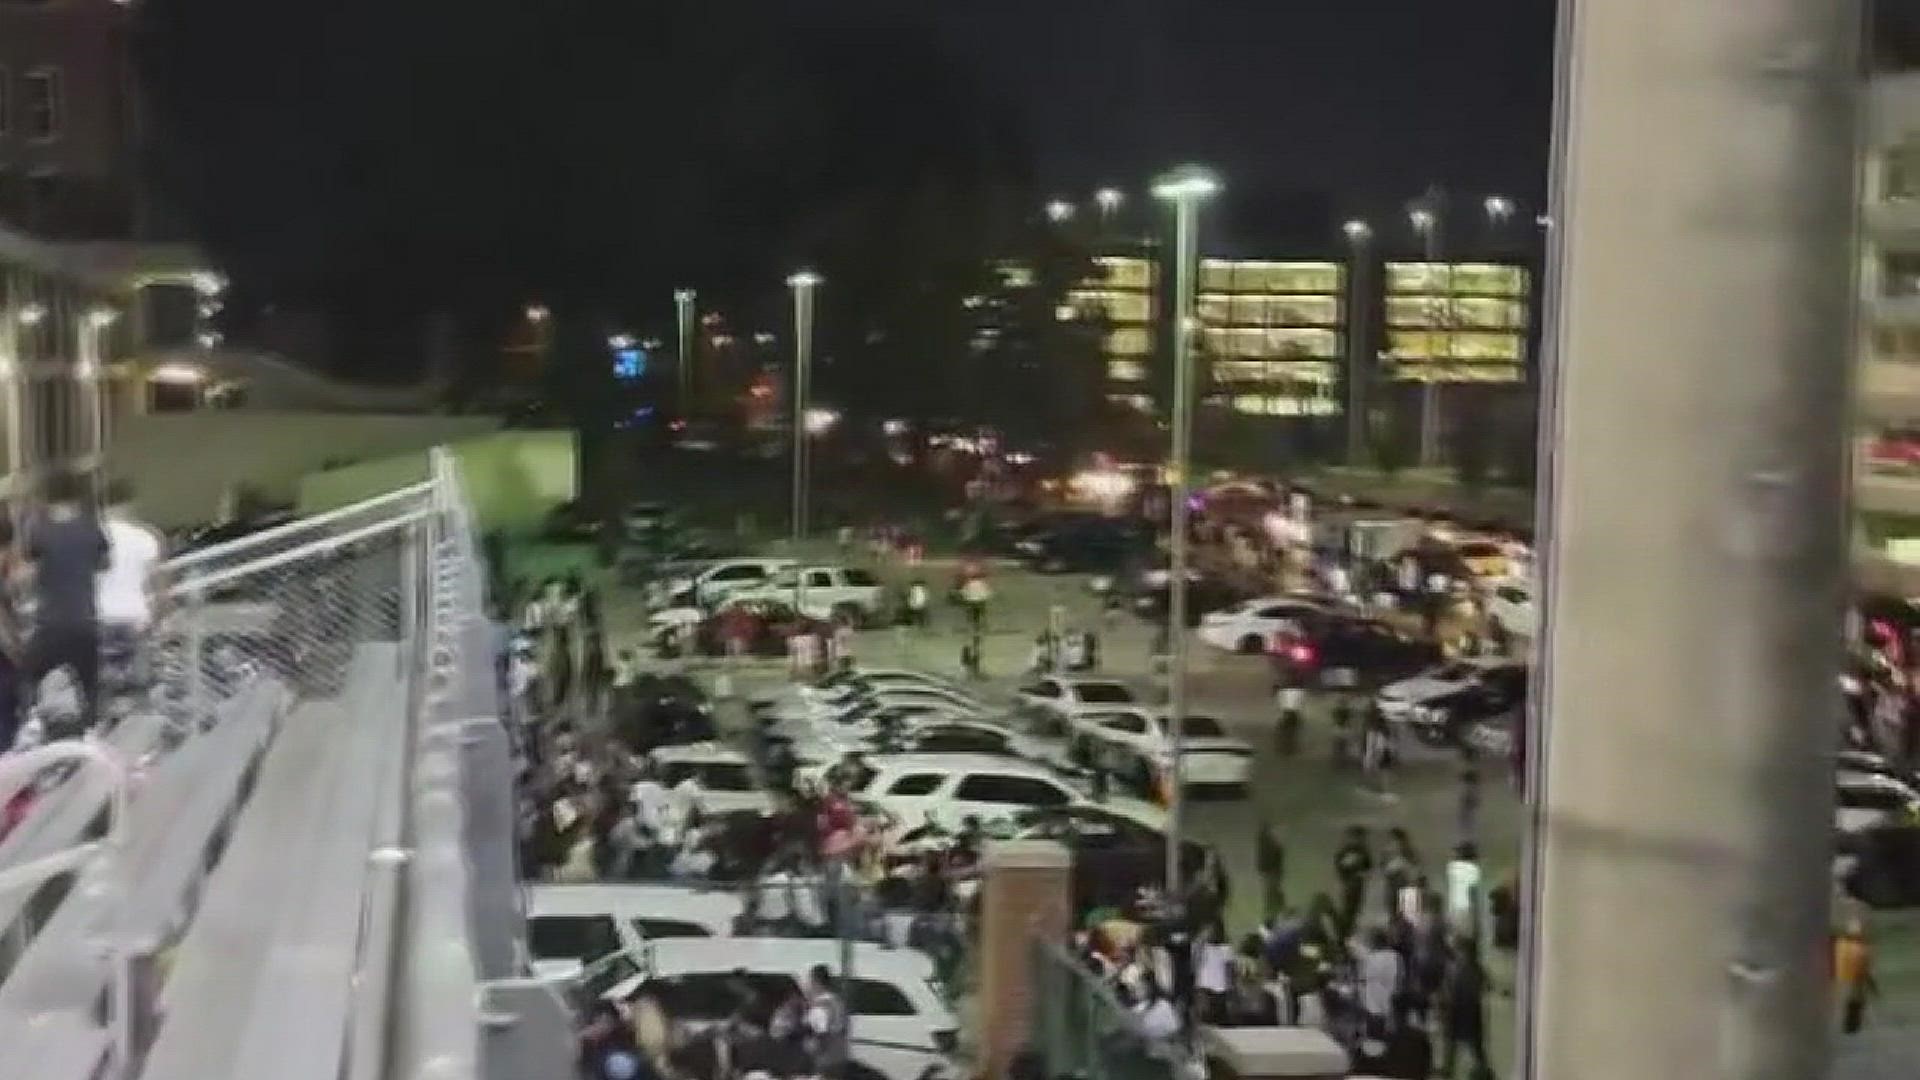 This video, courtesy of Larry Kimble Jr., shows the chaotic scene that erupted at Crump Stadium after a large fight broke out on campus Friday.